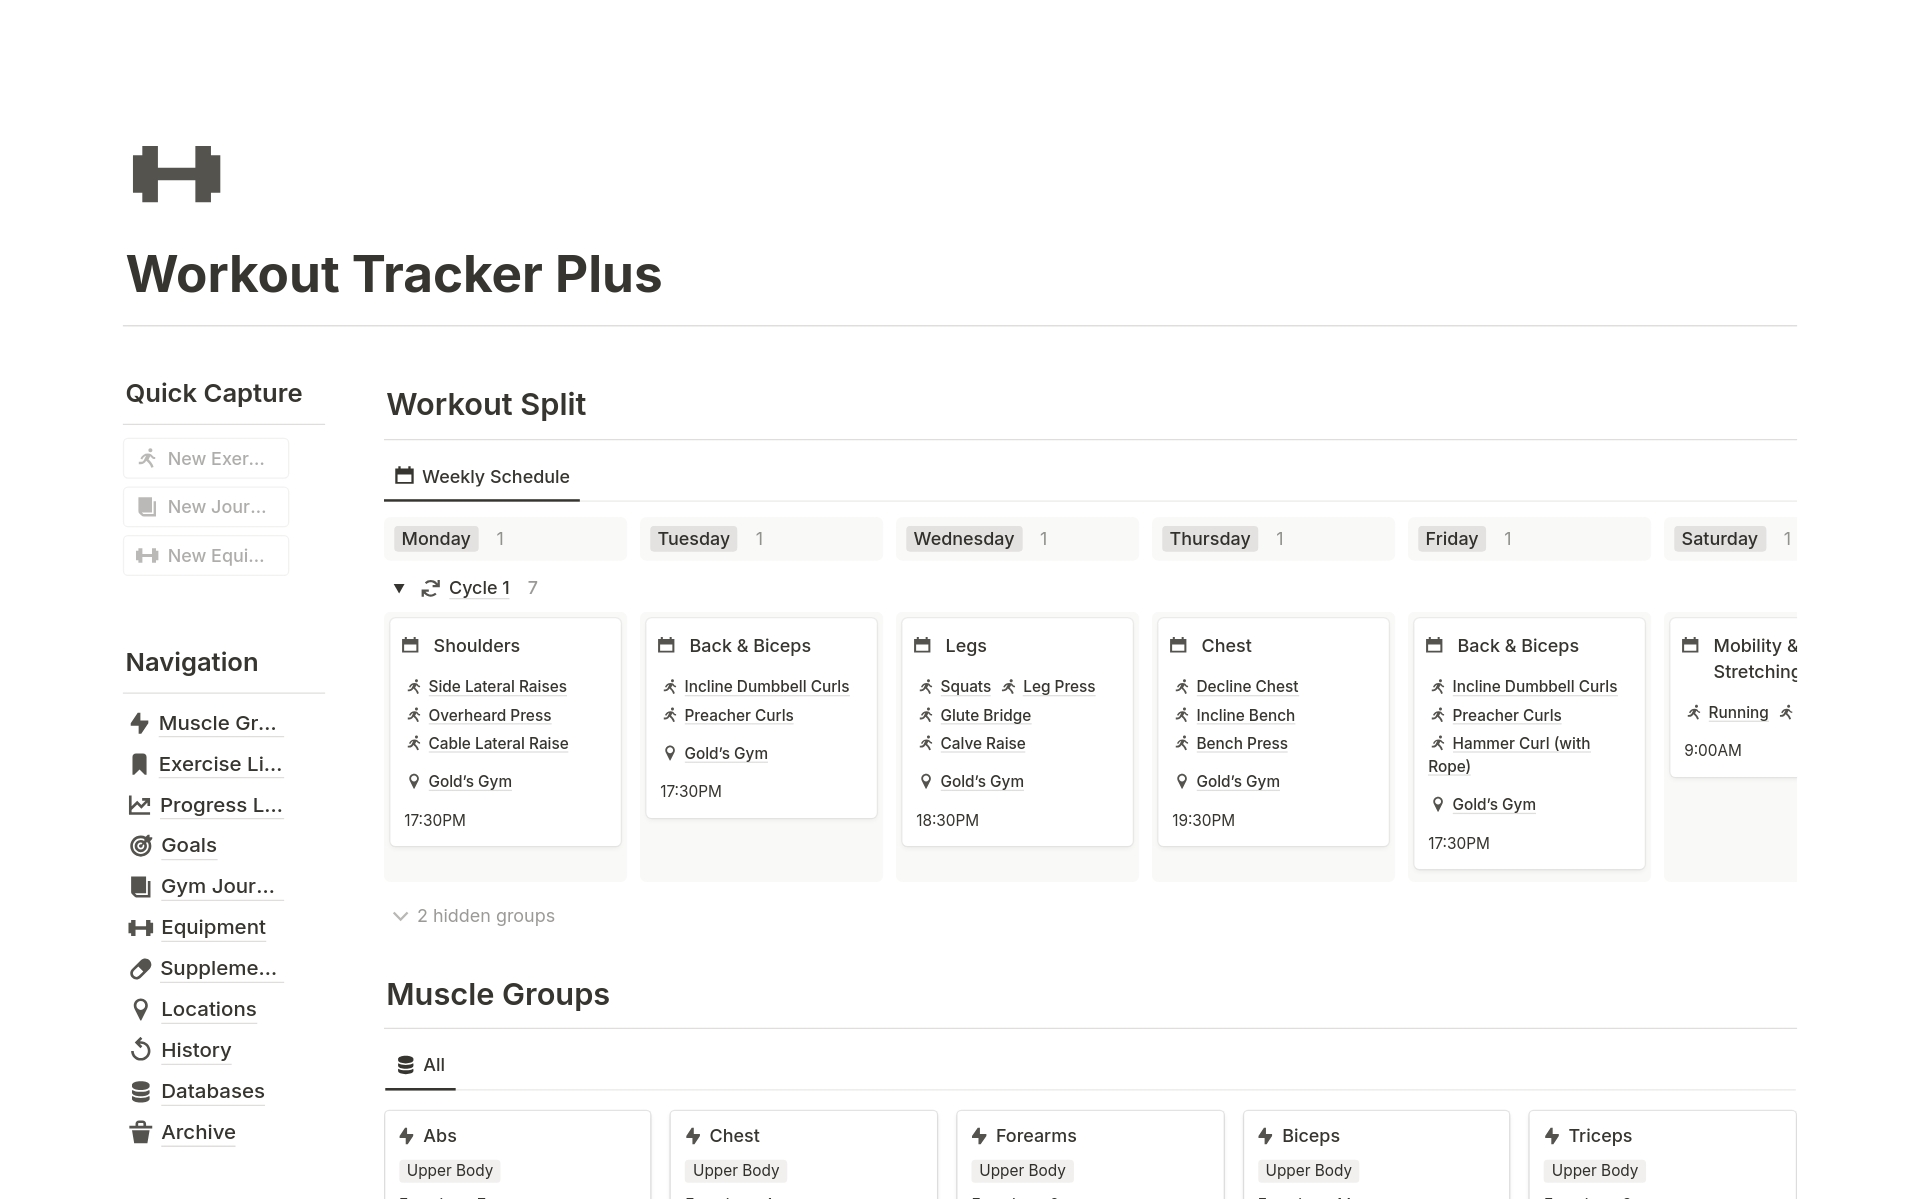 Our Workout Tracker helps you craft personalised workout routines, allowing flexibility for any desired duration. Track exercises, sets, reps, and weights effortlessly to achieve your fitness milestones.